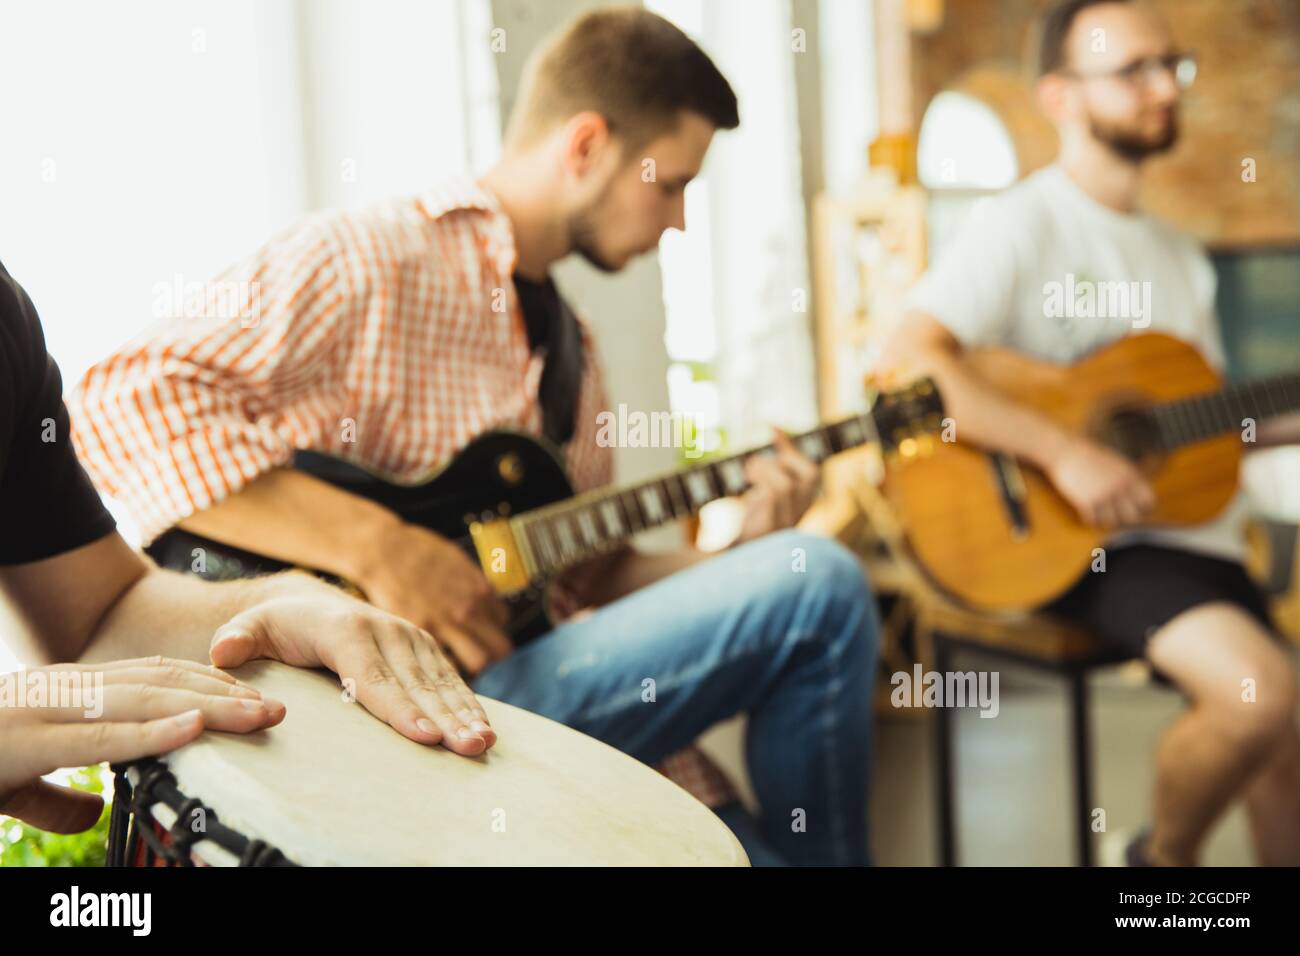 Songs. Musician band jamming together in art workplace with instruments. Caucasian men and women, musicians, playing and singing together. Concept of music, hobby, emotions, art occupation. Stock Photo